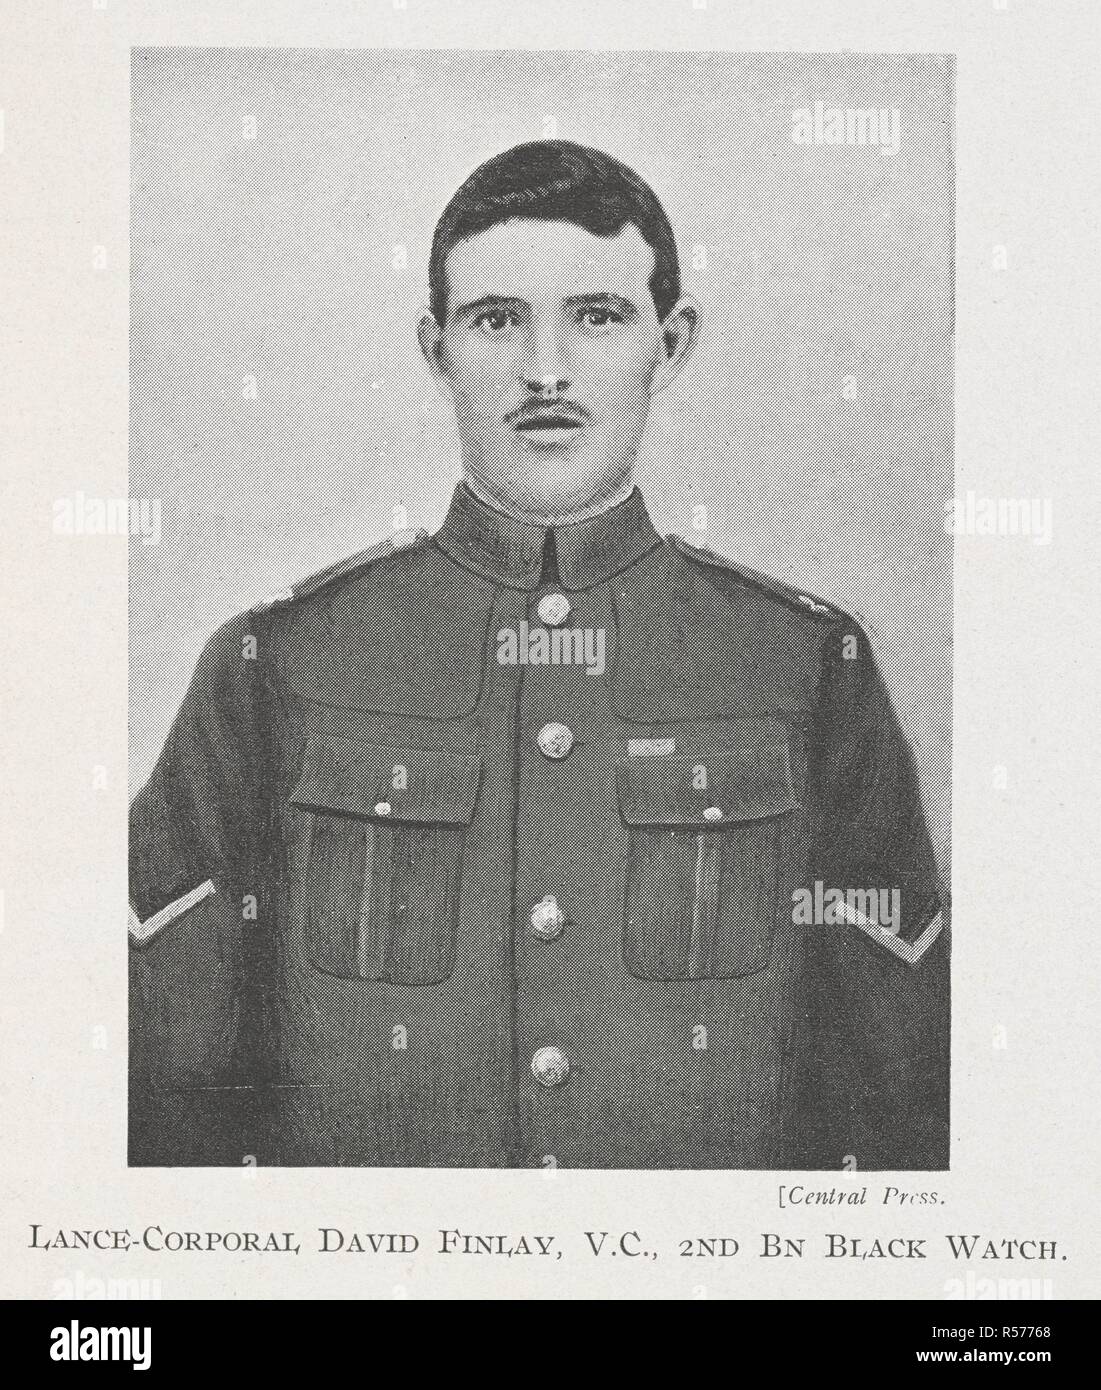 Lance-Corporal David Finlay, V.C., 2nd bn. Black Watch. David Finlay VC (20 January 1893 â€“ 21 January 1916) was a Scottish recipient of the Victoria Cross. On 9 May 1915 near Rue du Bois, France, Lance-Corporal Finlay led a bombing party of 12 men in the attack until 10 of them had fallen. He then ordered the two survivors to crawl back and he himself went to the assistance of a wounded man and carried him over a distance of 100 yards of fire-swept ground into cover, quite regardless of his own safety. He was killed in action in Mesopotamia on 21 January 1916 and is remembered on the Basra M Stock Photo